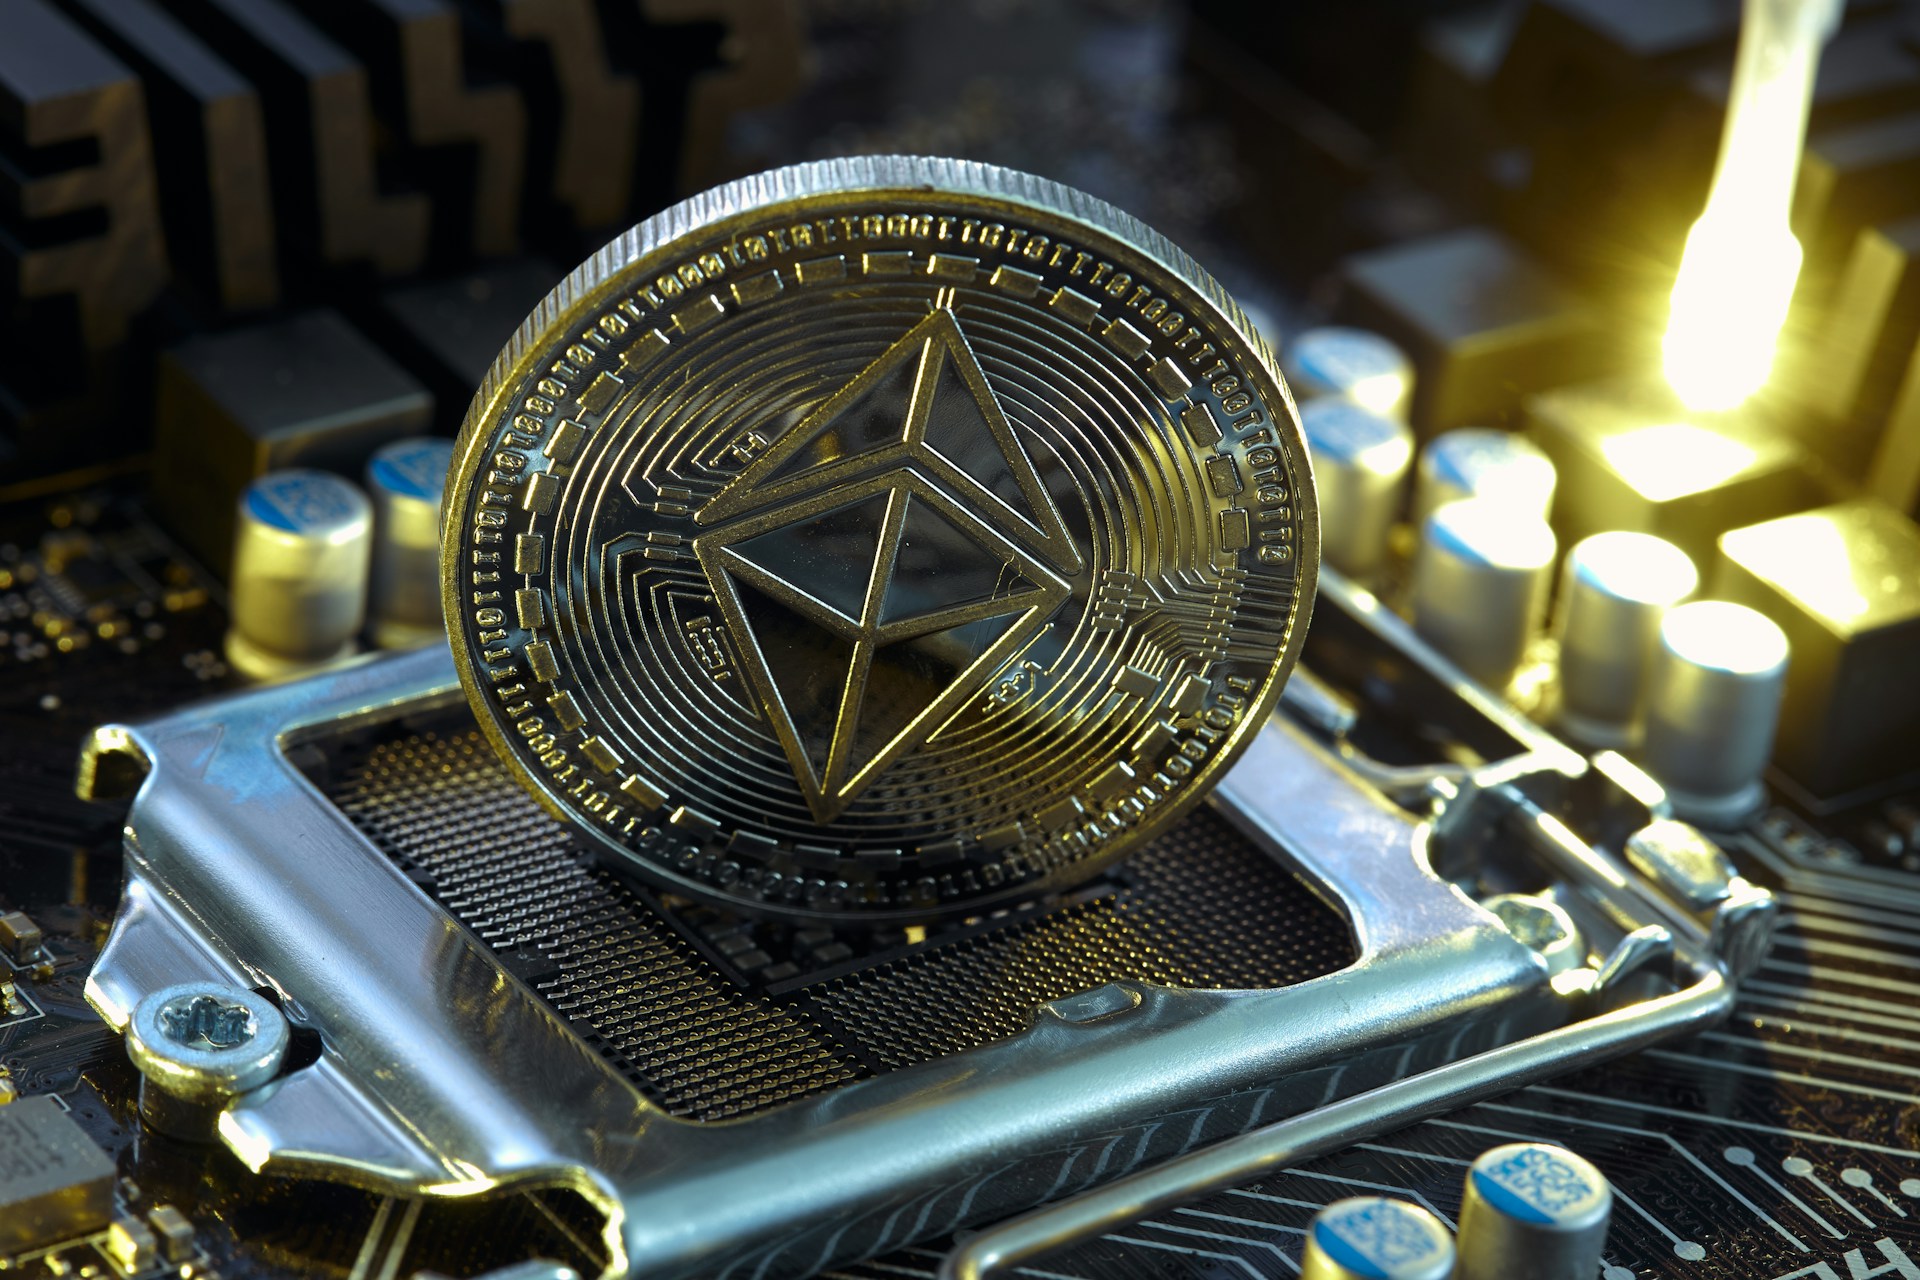 SEC Reportedly Probes Ethereum Foundation but Would Struggle to Backtrack on ETH’s Commodity Status